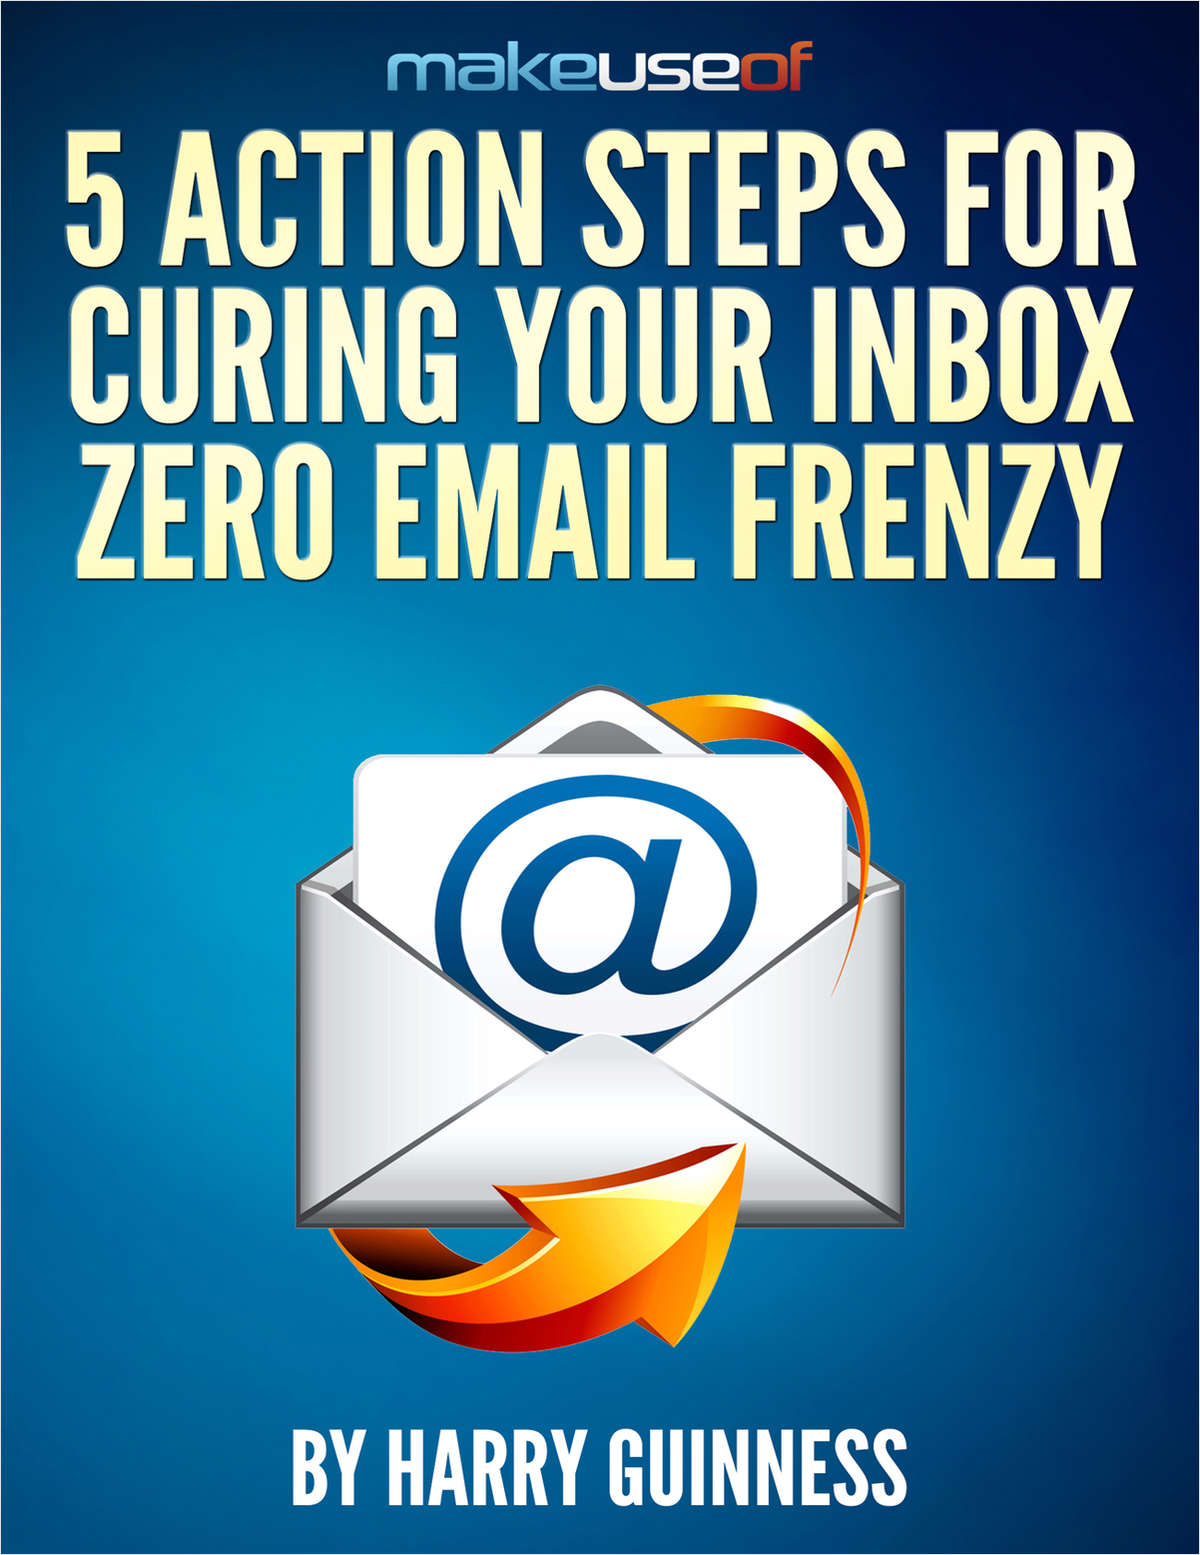 5 Action Steps For Curing Your Inbox Zero Email Frenzy